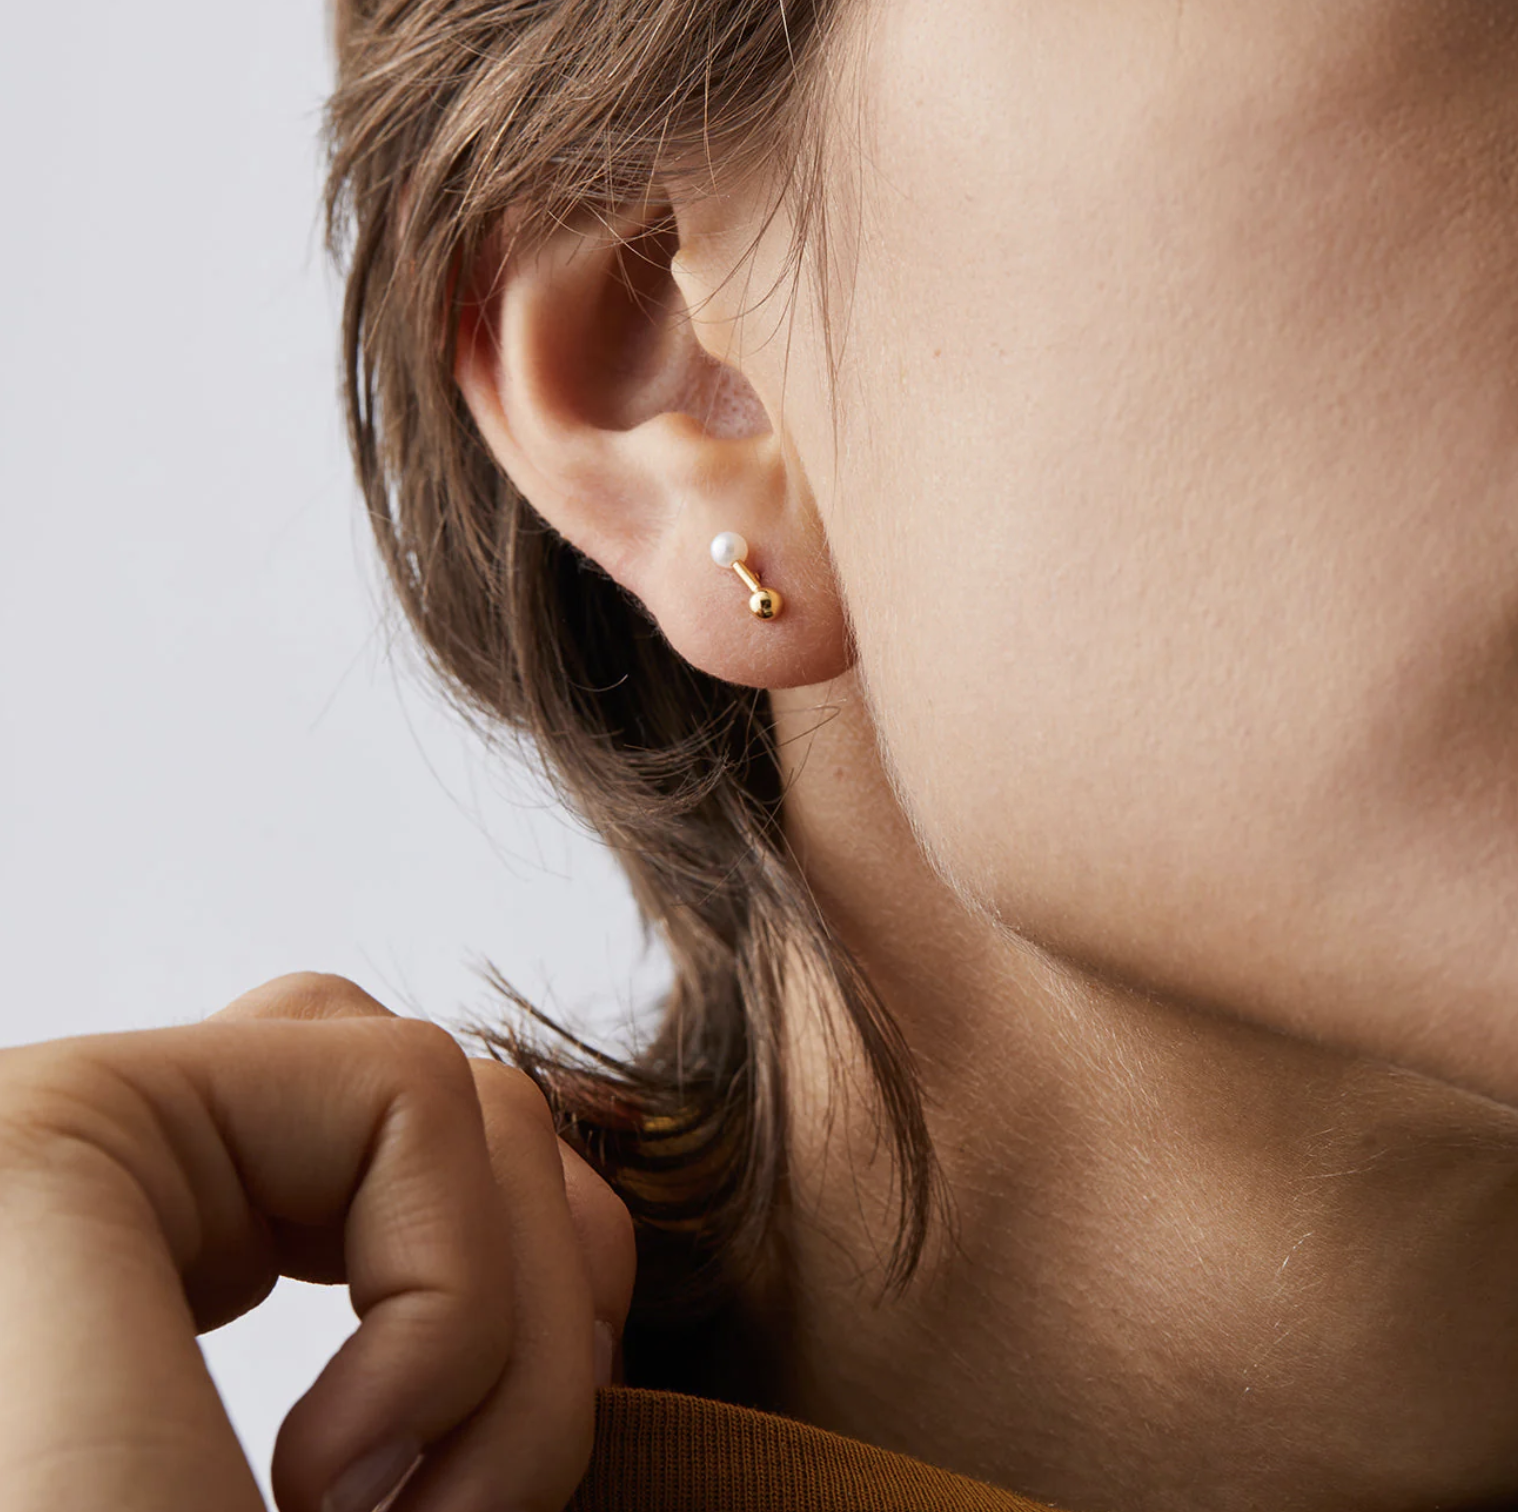 A person wearing one of the studs in their ear